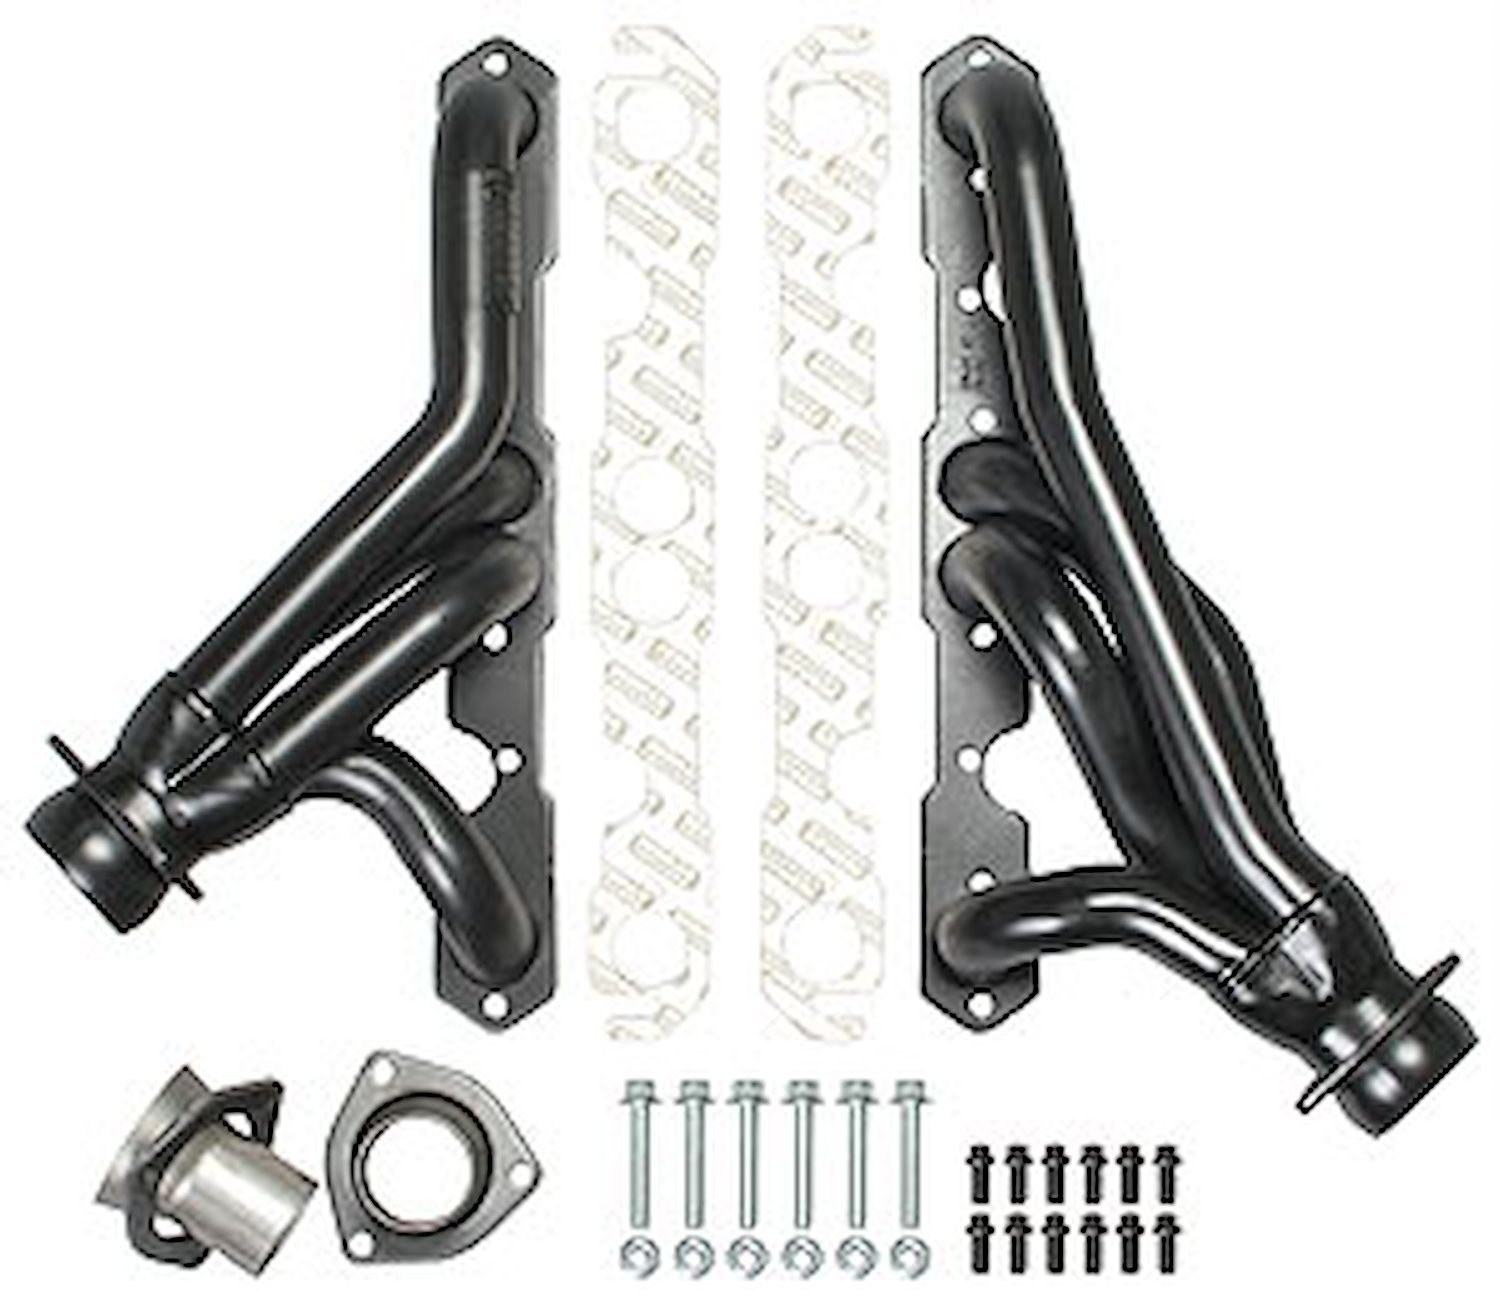 Standard Duty Uncoated Shorty Headers for 1987-95 Jeep